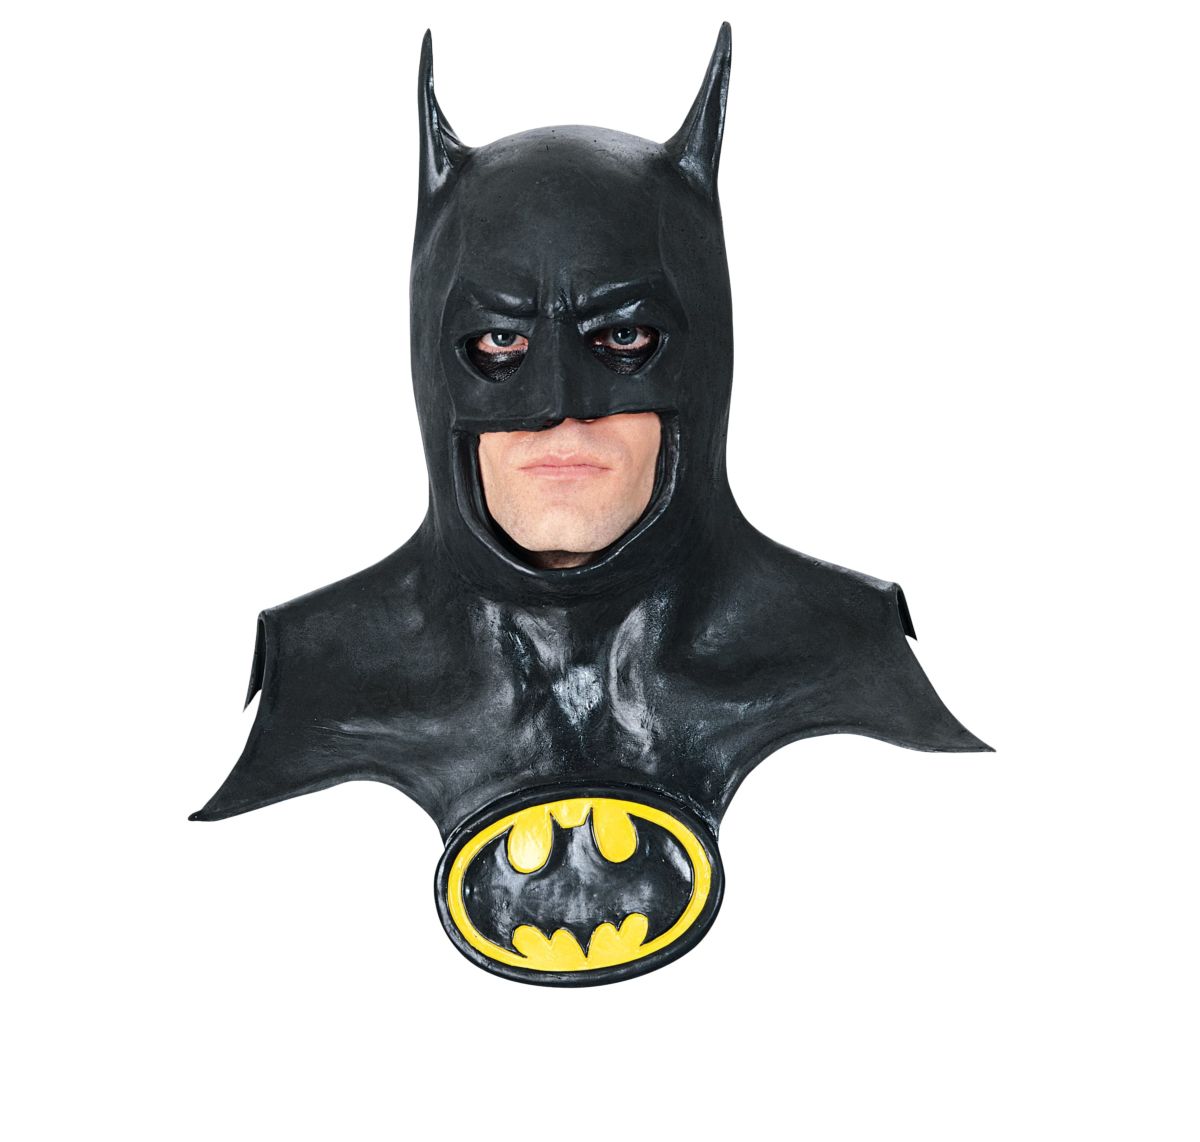 Batman Mask: The Symbol in the Darkness插图